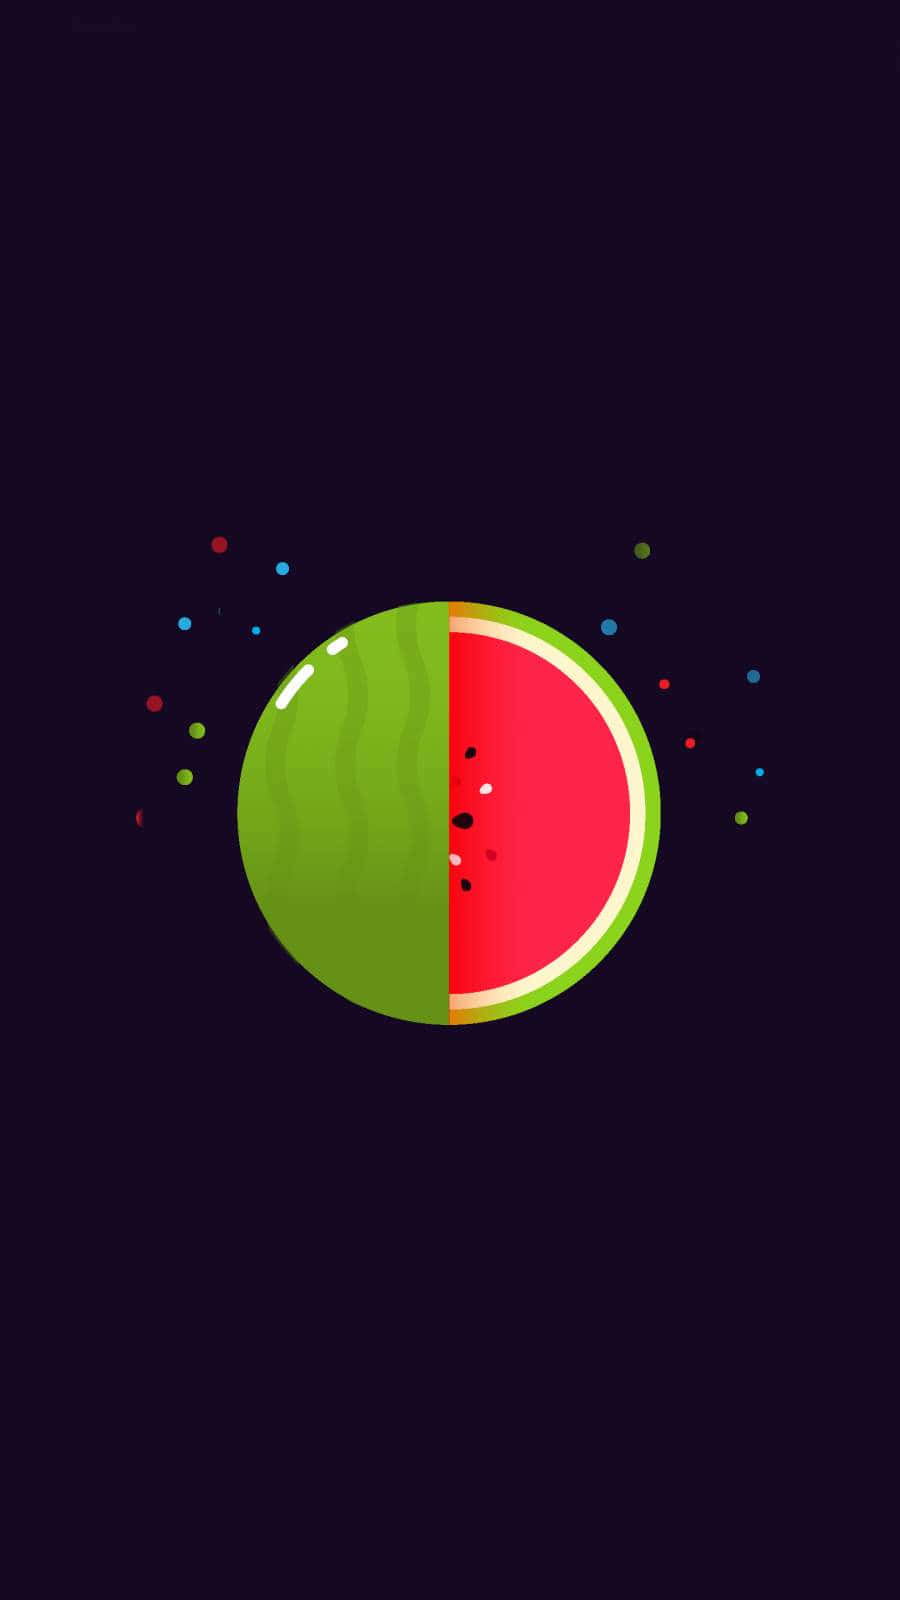 Chill out this summer with a unique and refreshing Watermelon iPhone Wallpaper